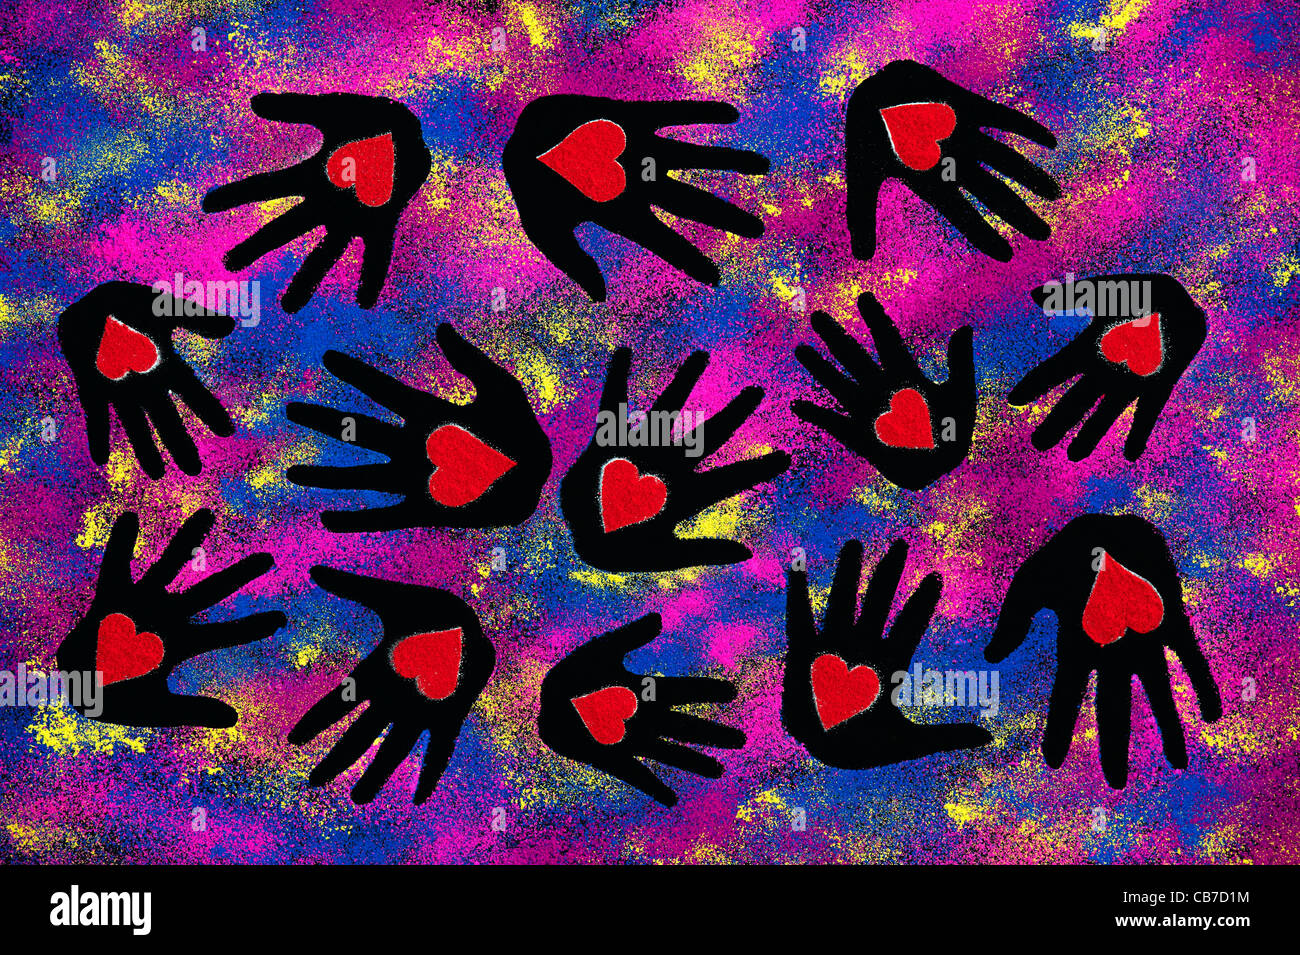 Childs hand prints with red heart shapes made with coloured powder on a black background Stock Photo